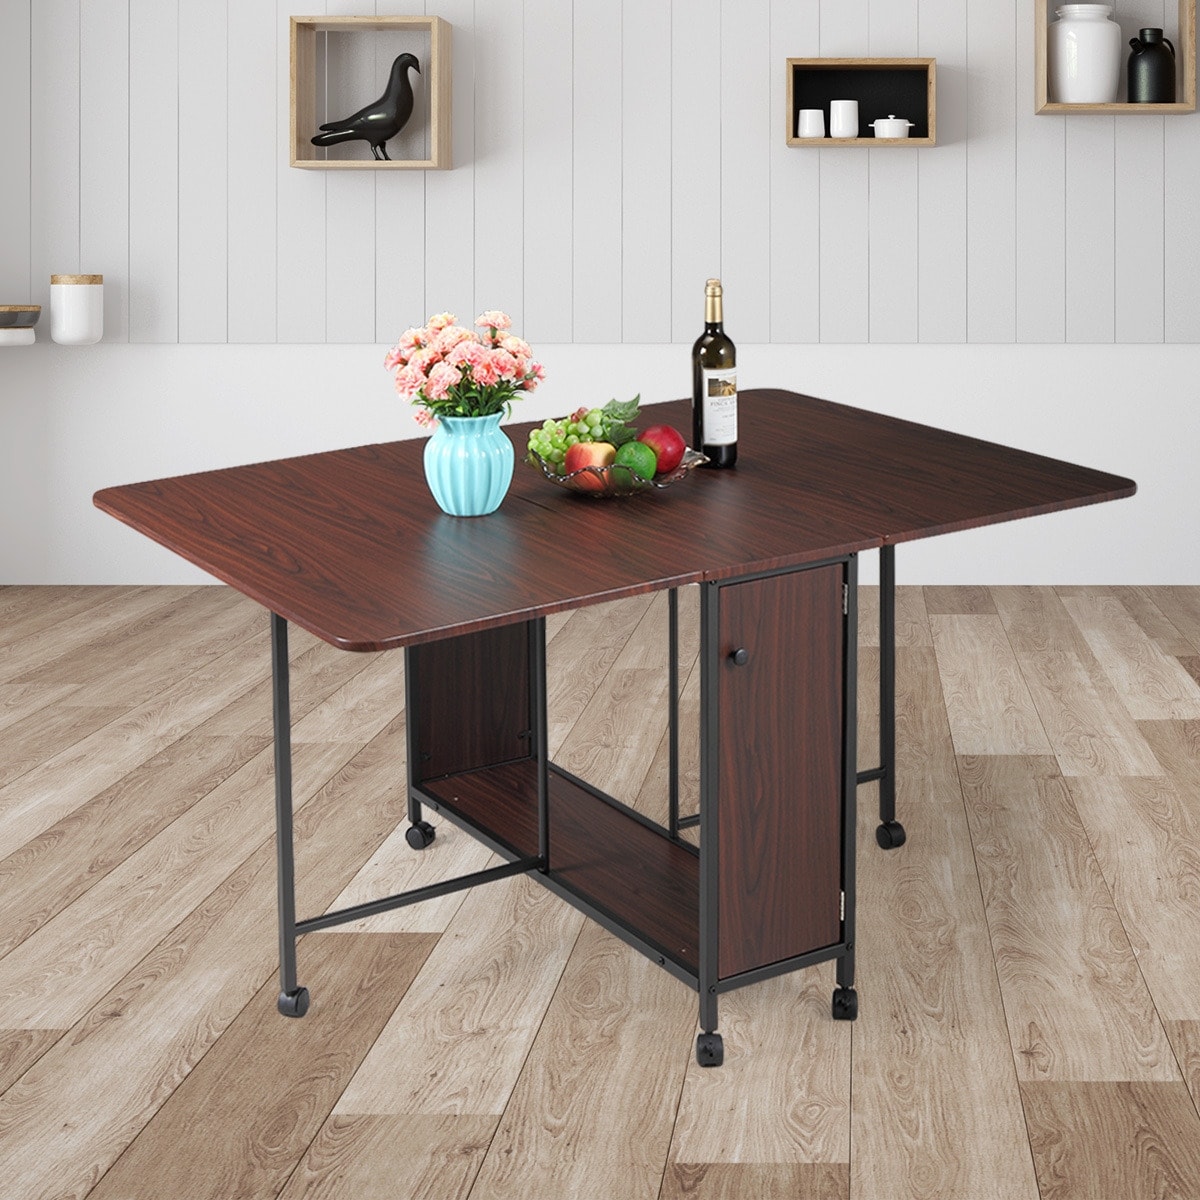 https://ak1.ostkcdn.com/images/products/is/images/direct/903c7df1cd6a6593590911490b0a37c288097b3b/Rolling-Foldable-Dining-Table-Craft-Table-Workstation.jpg